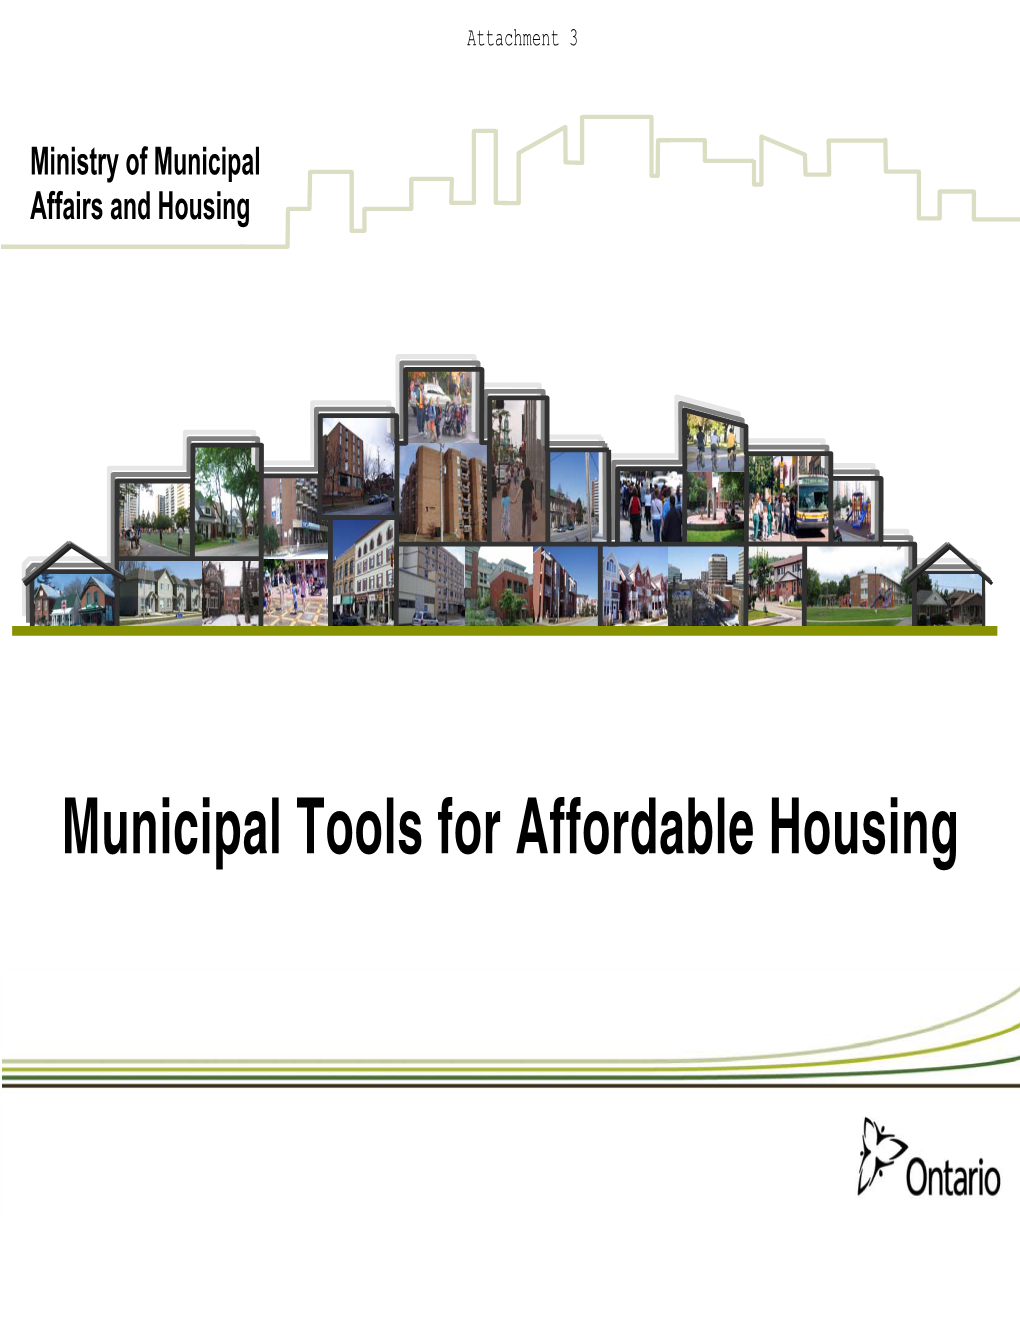 Municipal Tools for Affordable Housing